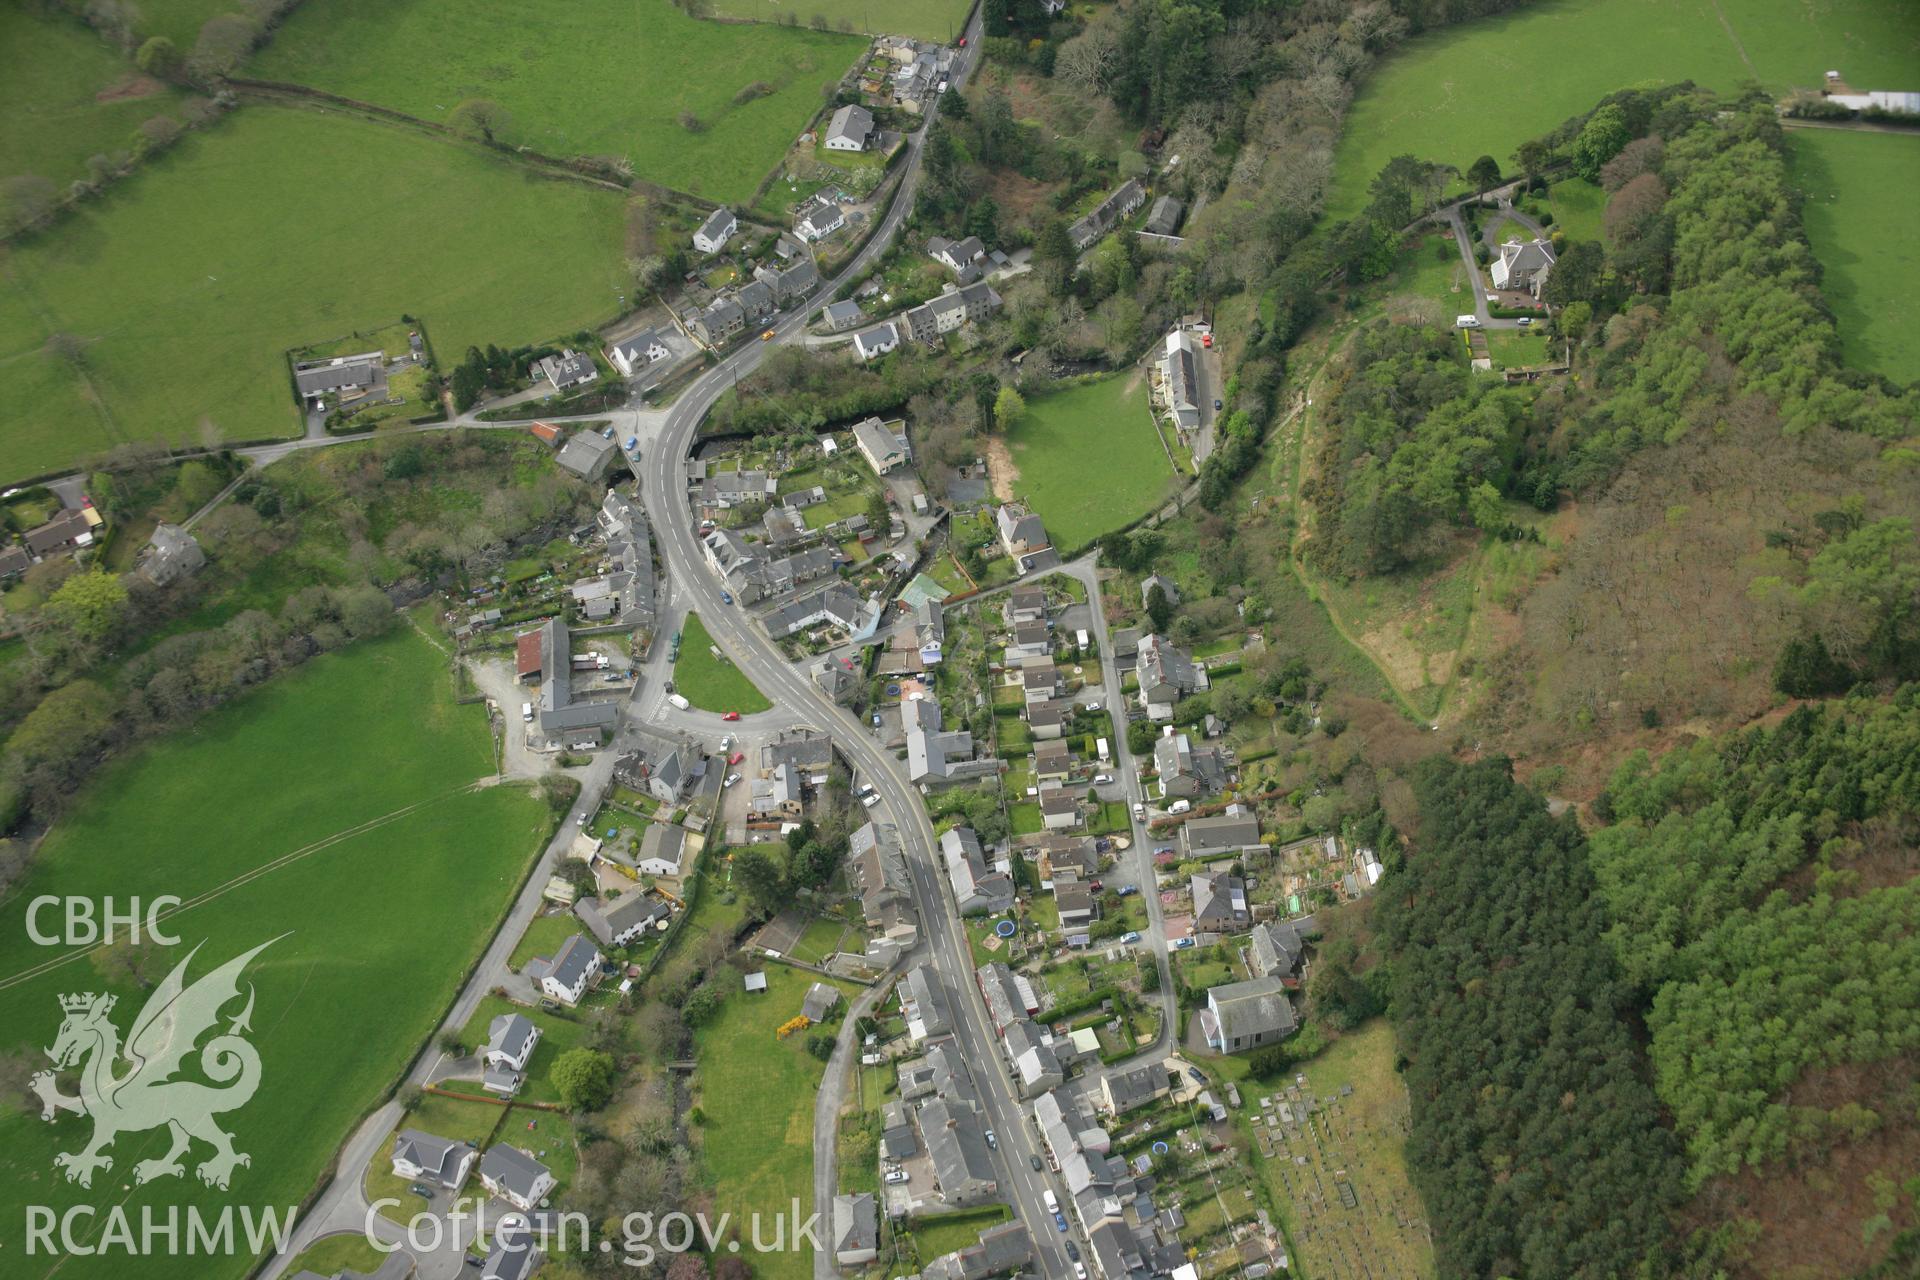 RCAHMW colour oblique aerial photograph of Talybont. Taken on 17 April 2007 by Toby Driver